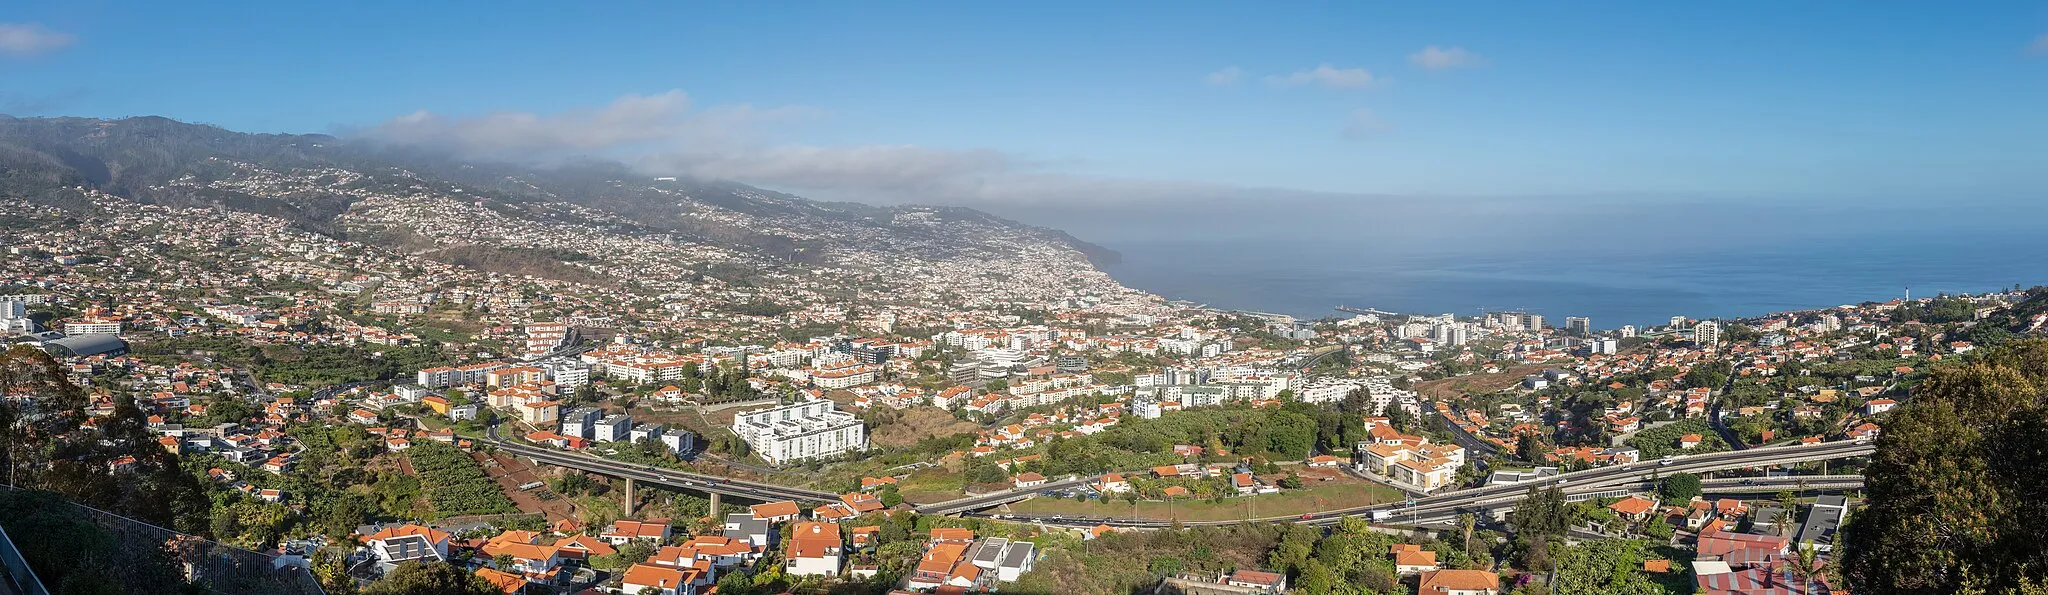 Photo showing: View of Funchal from Pico dos Barcelos, Madeira, Portugal